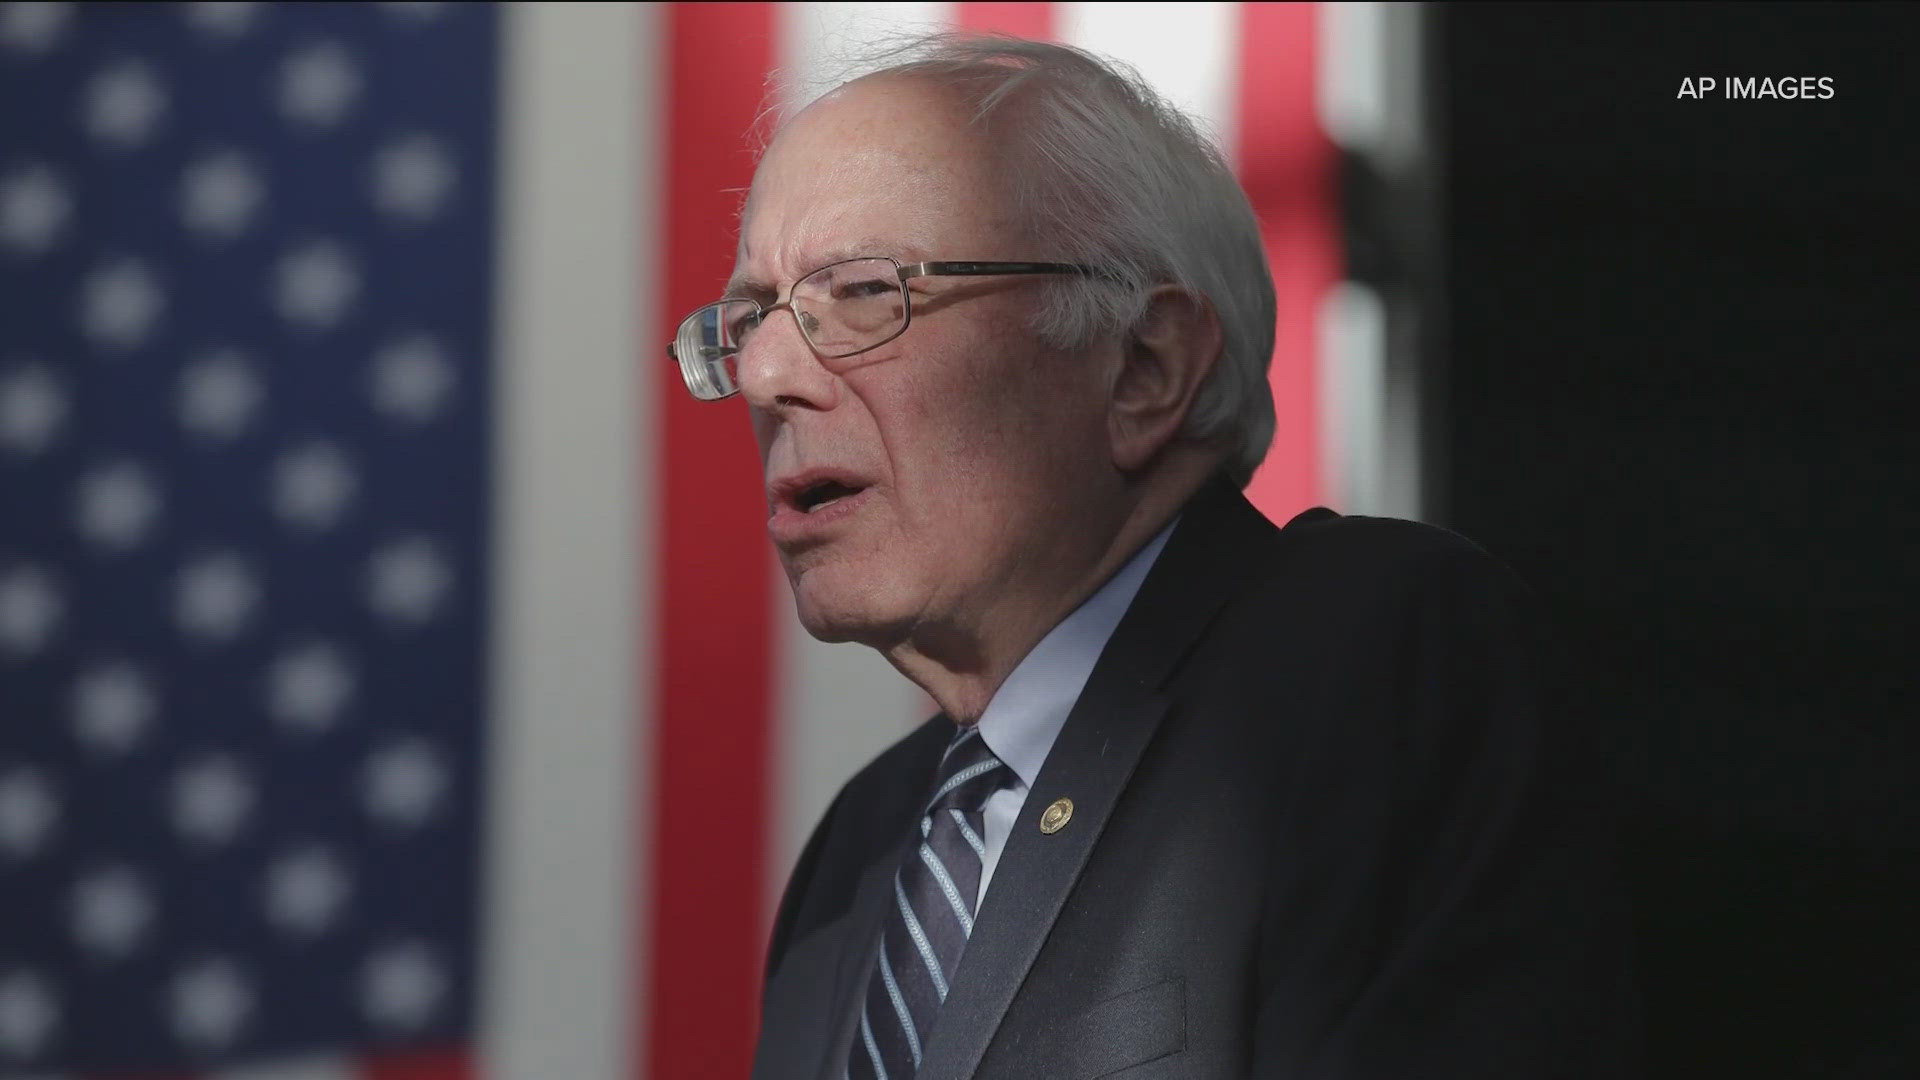 82-year-old Sanders said he plans to support President Biden's campaign for reelection, as well.